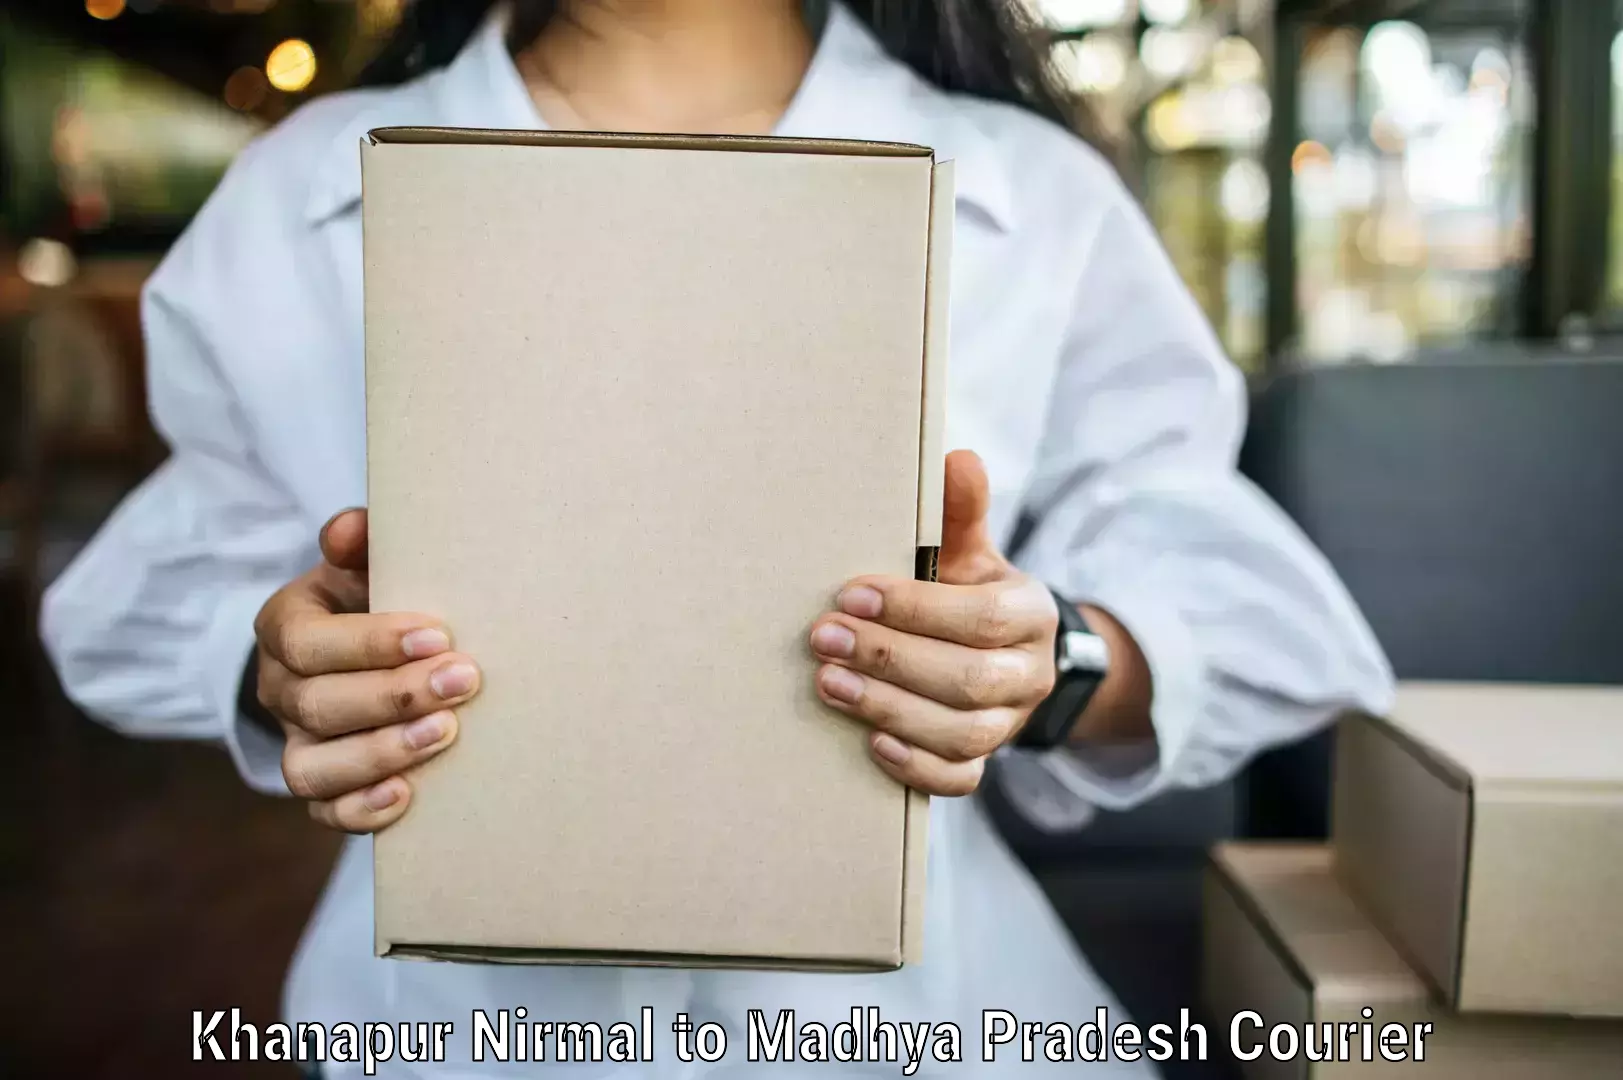 High value parcel delivery in Khanapur Nirmal to Gwalior